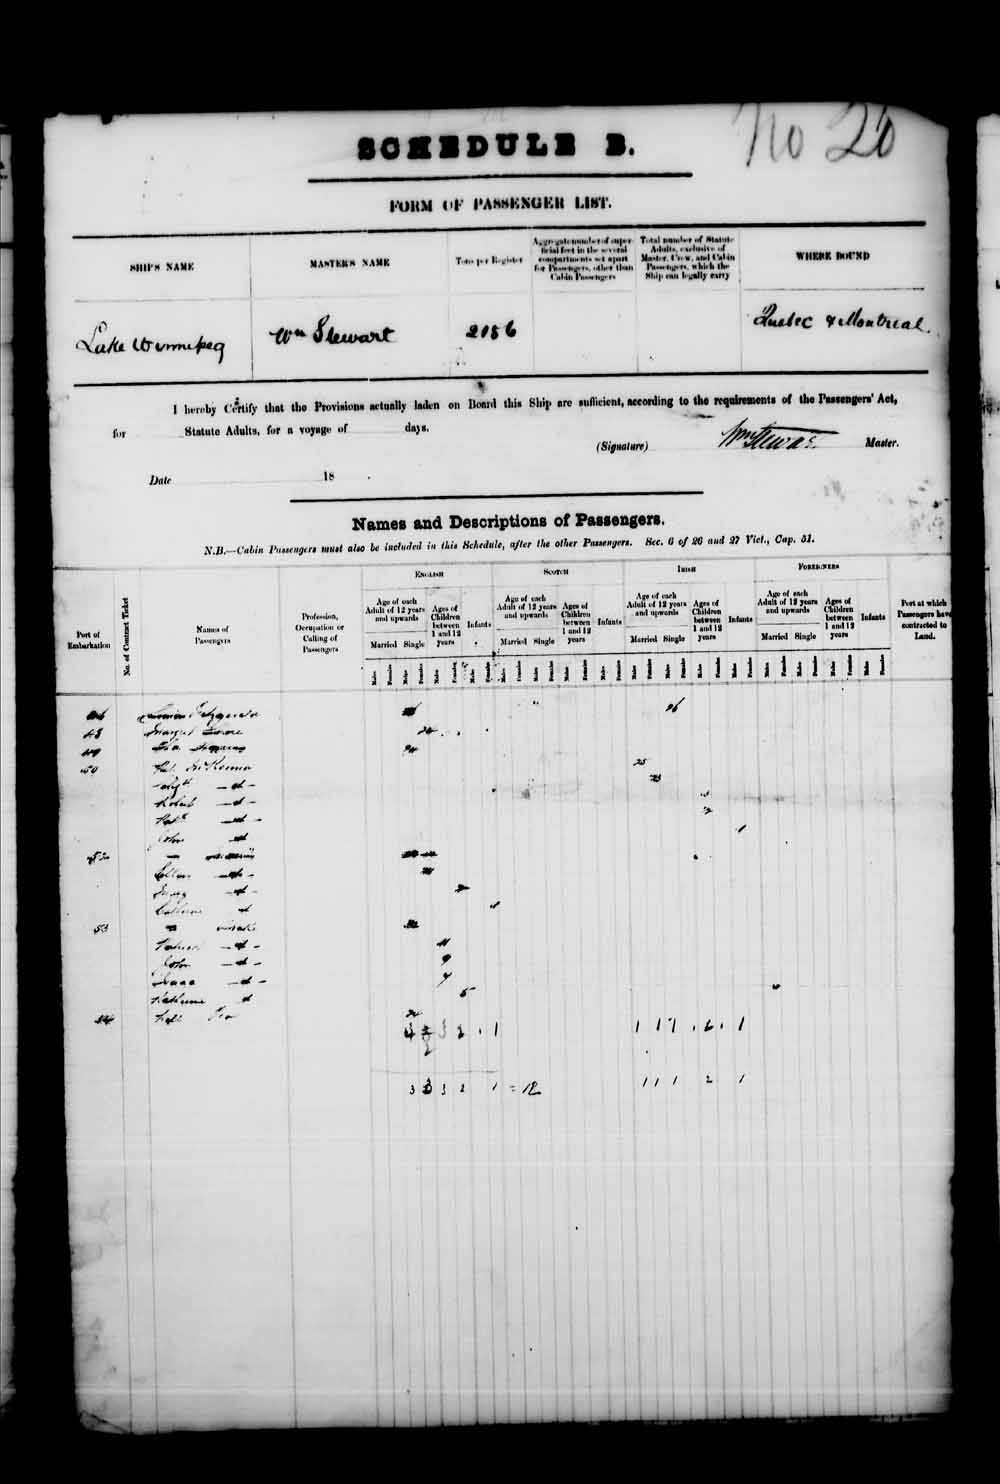 Digitized page of Passenger Lists for Image No.: e003541615